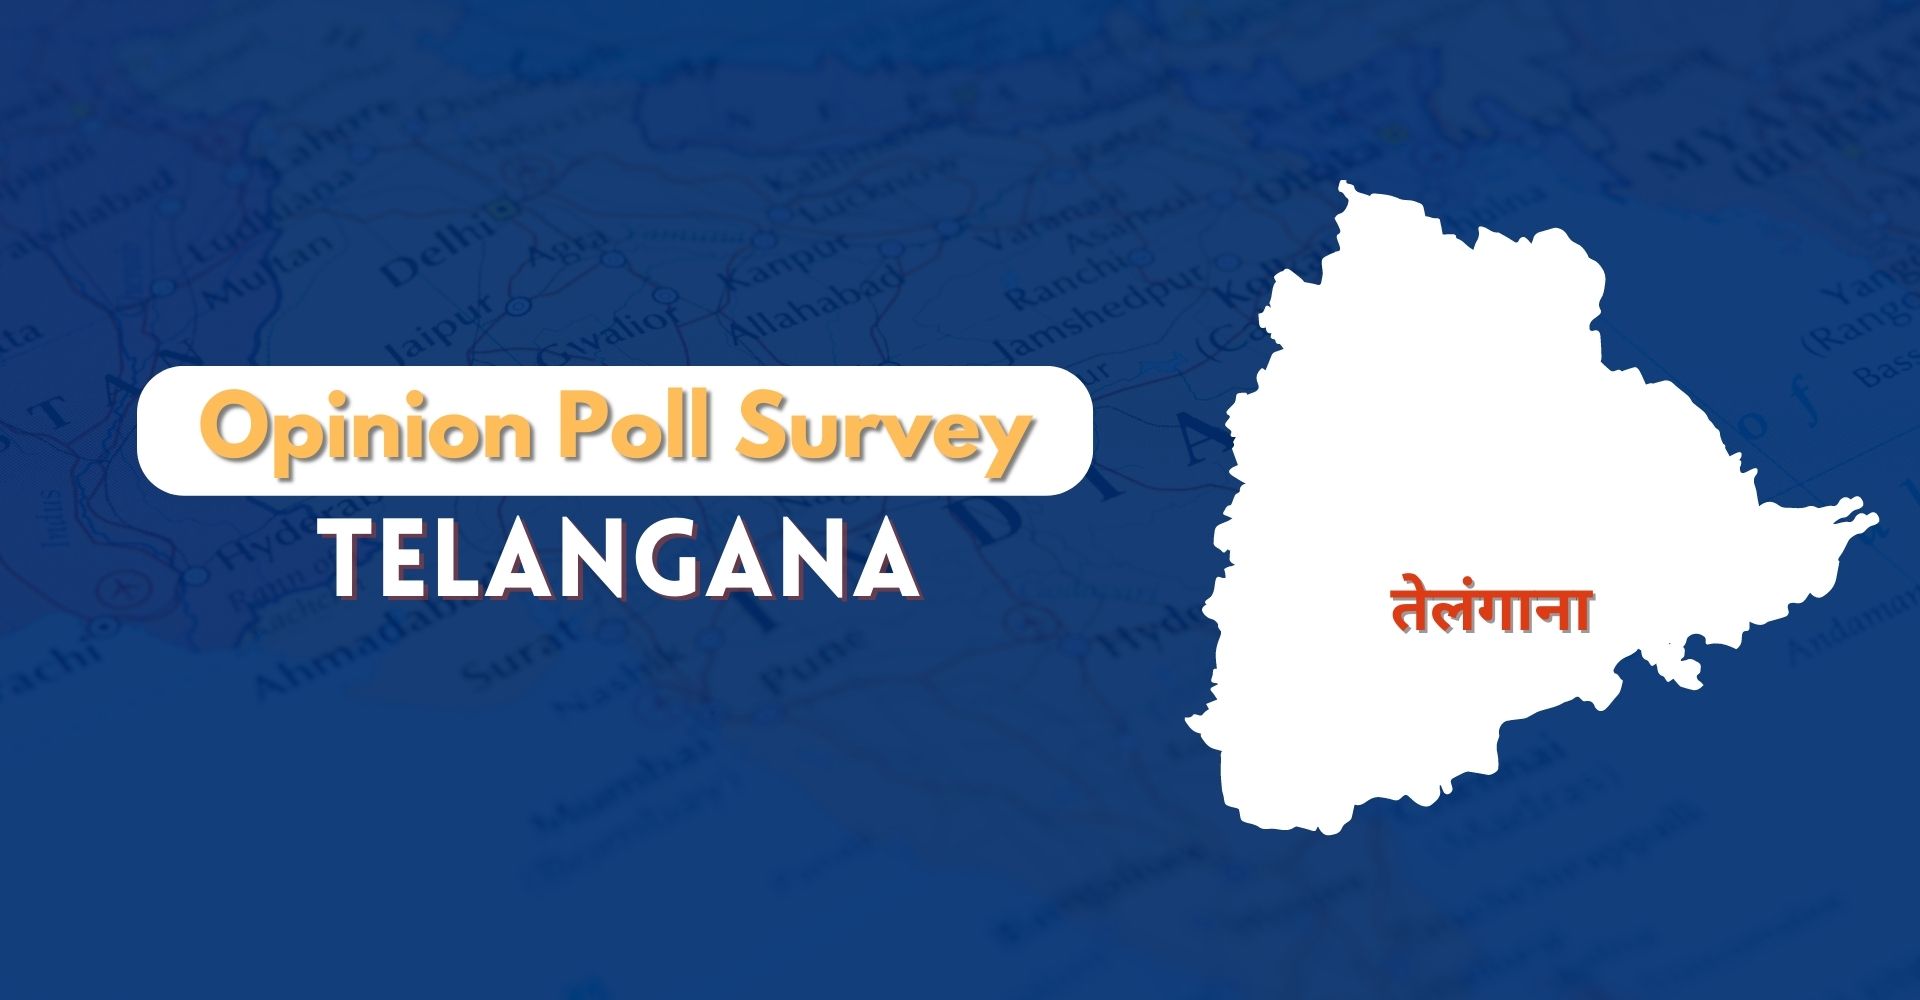 Opinion Poll Survey in Telangana Election